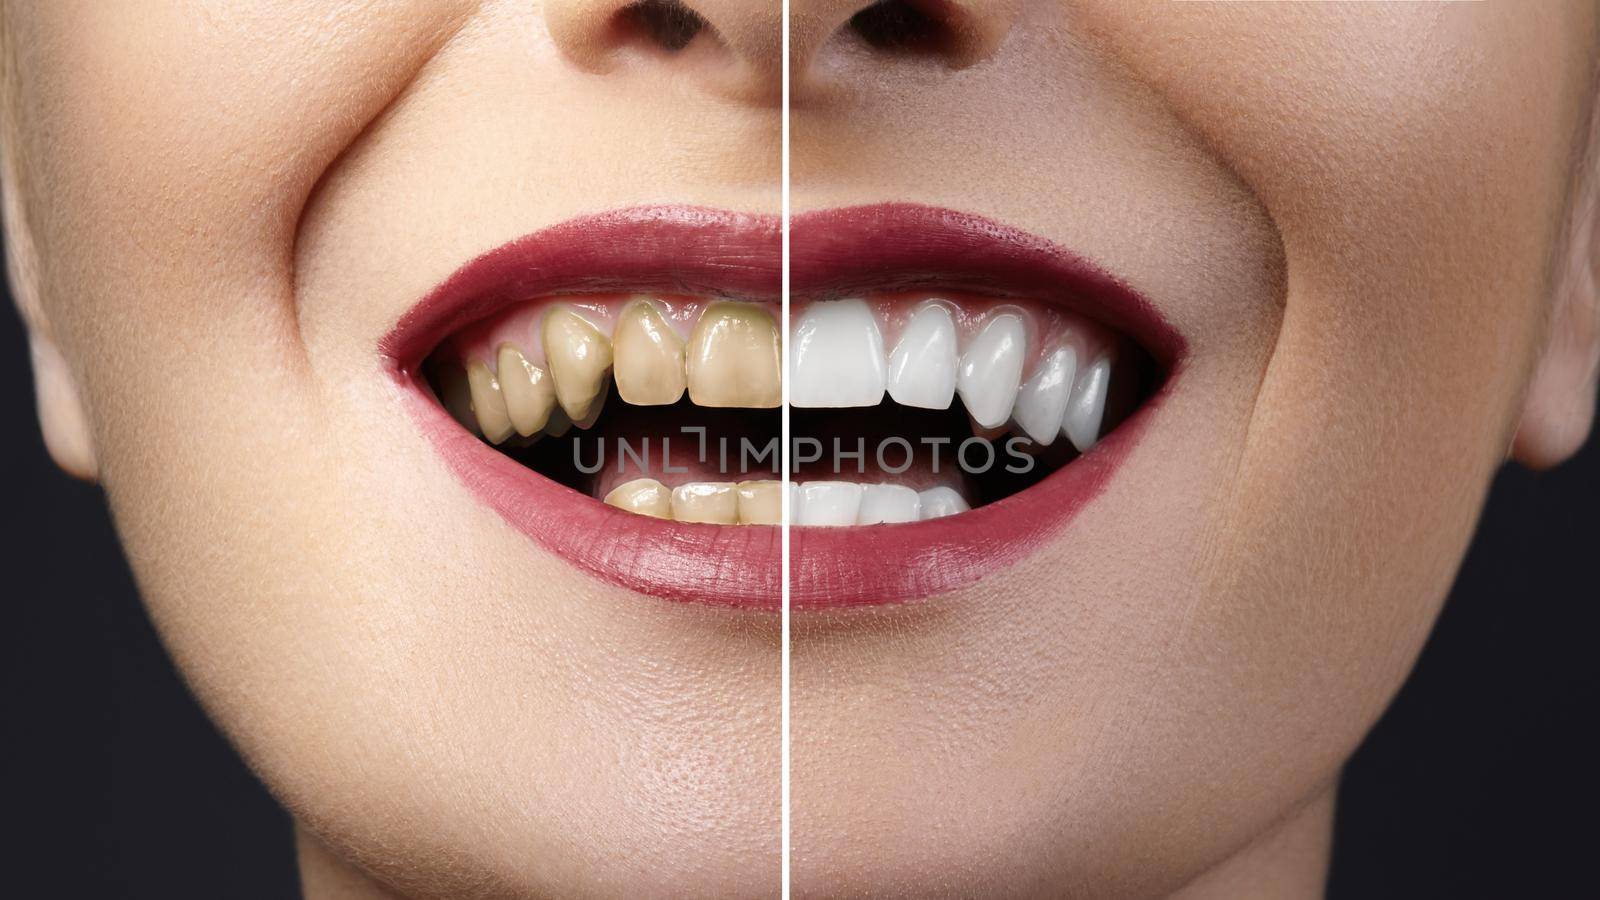 Before and after whitening treatment or dental veneers on teeth. Health Care collage of human mouth. Caries therapy by MarinaFrost